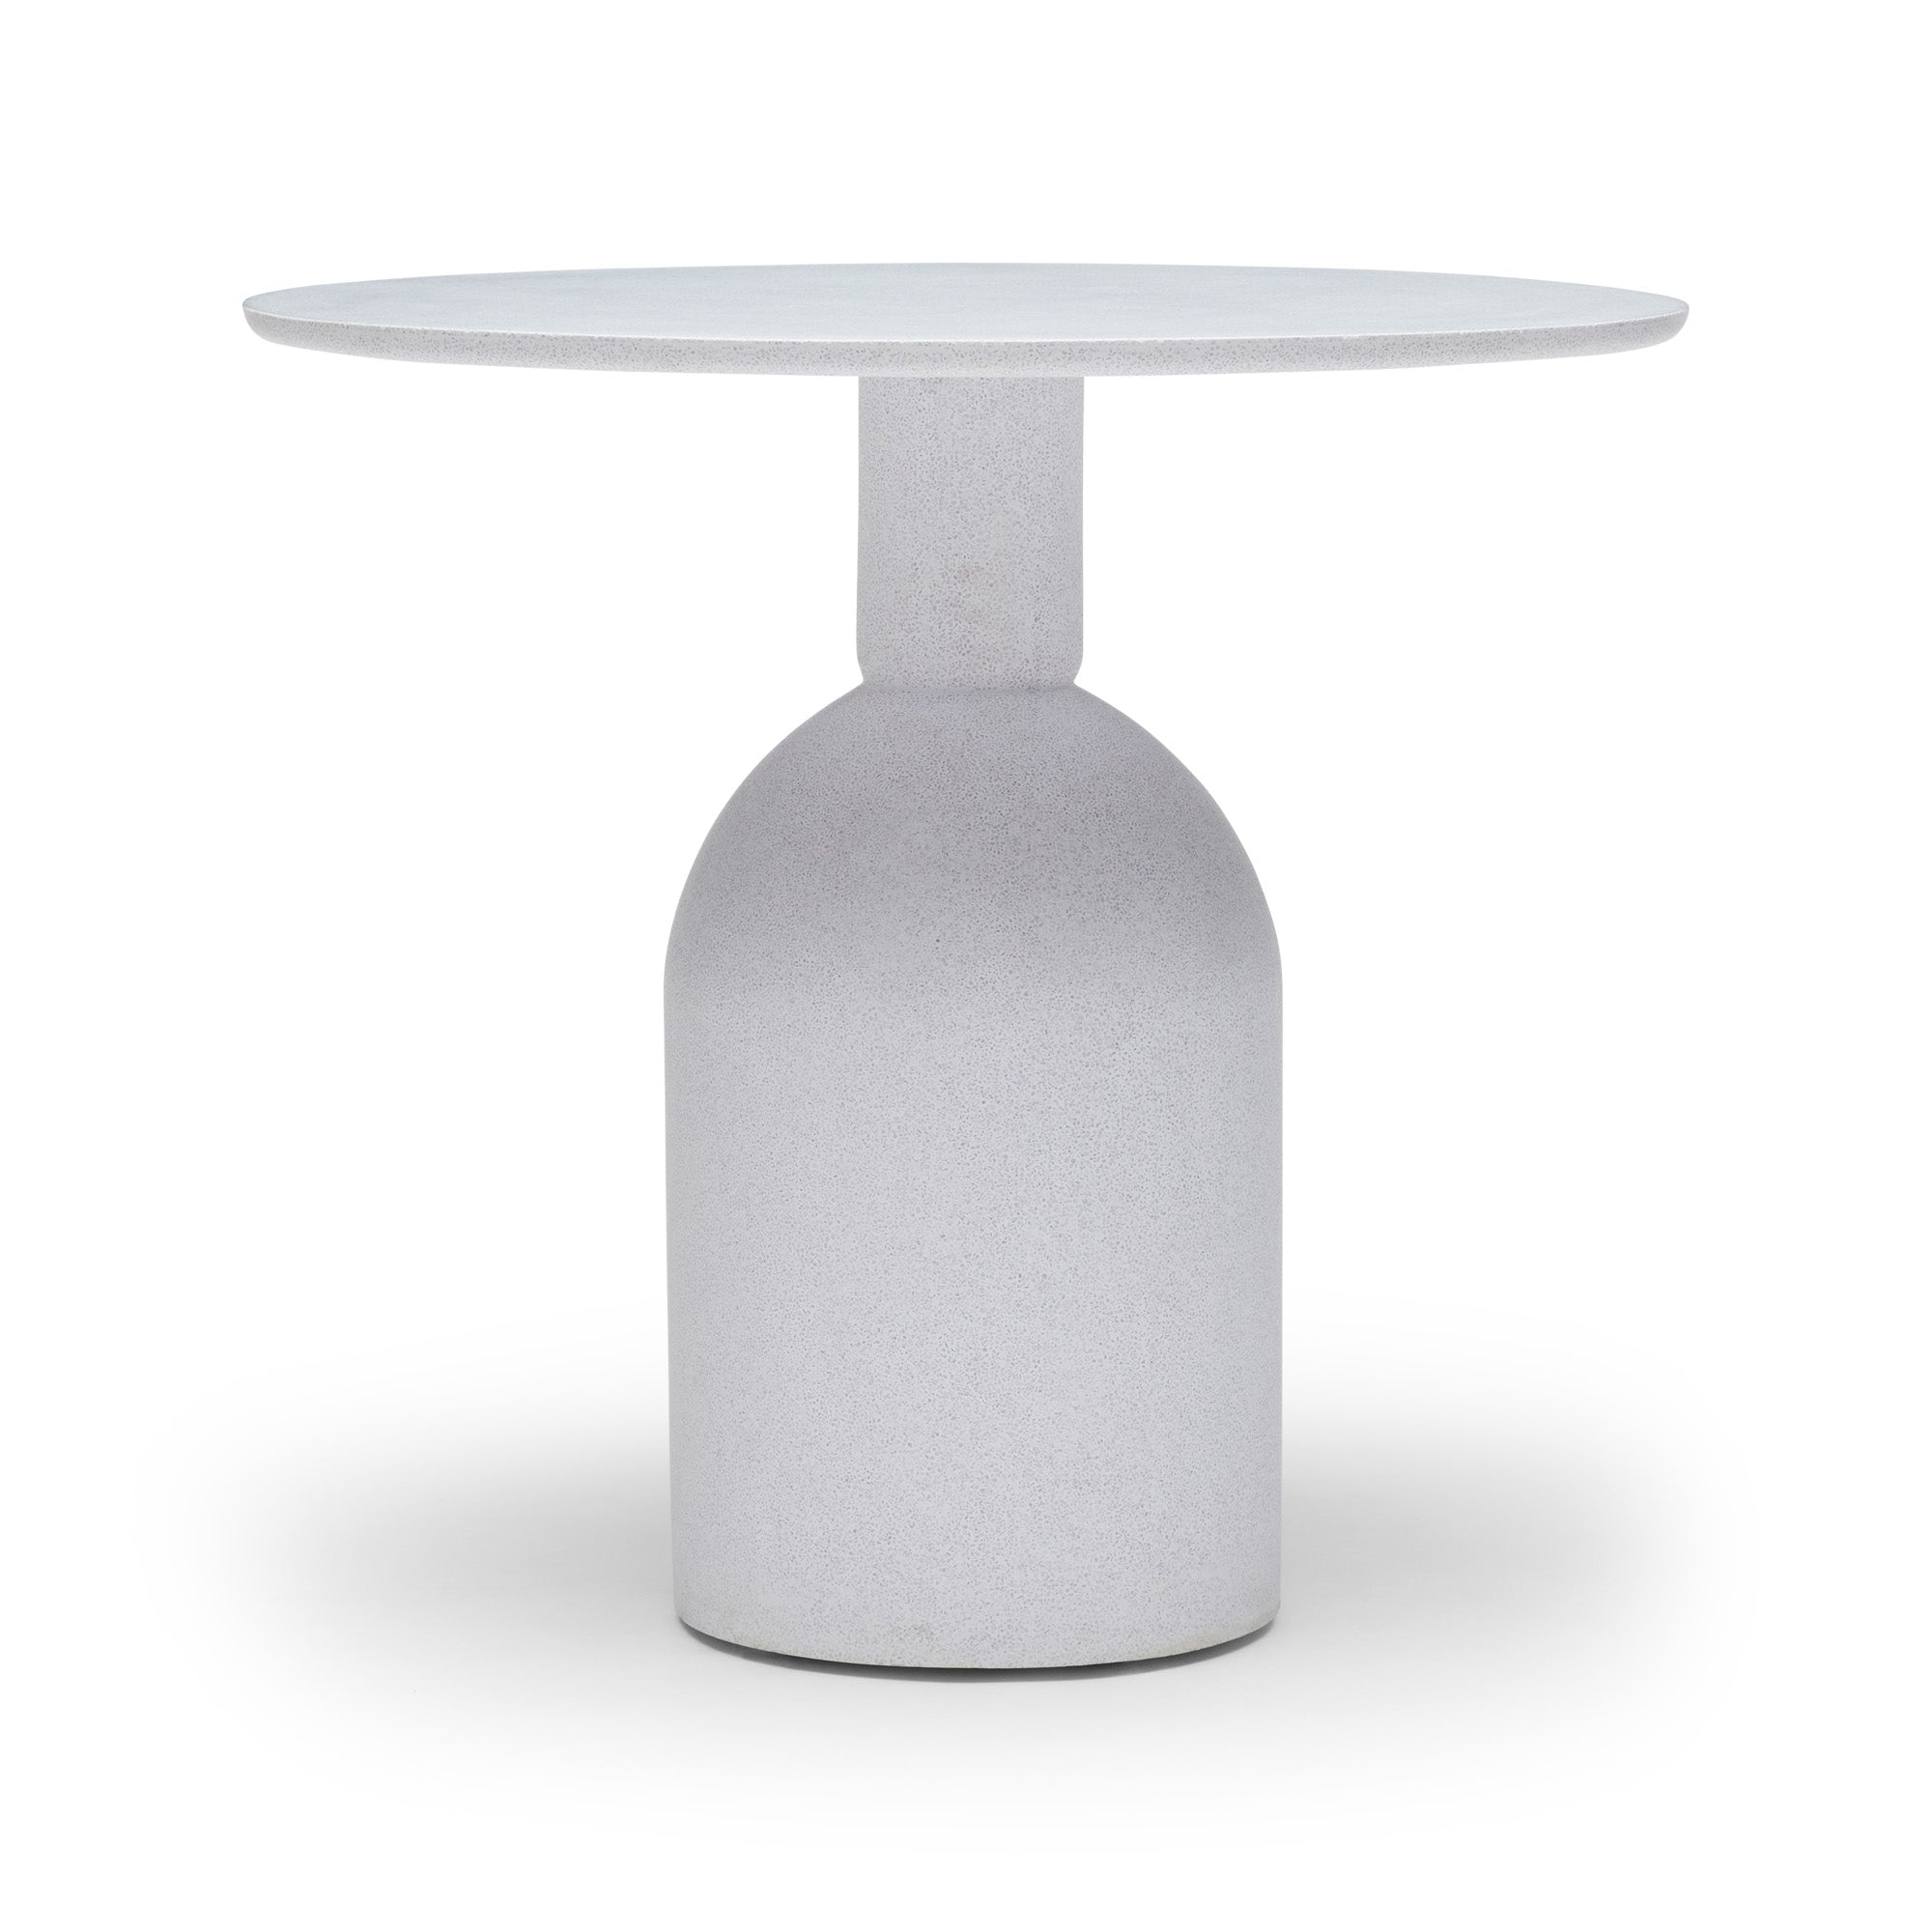 Avalon Outdoor Cafe Table White Ex-Display